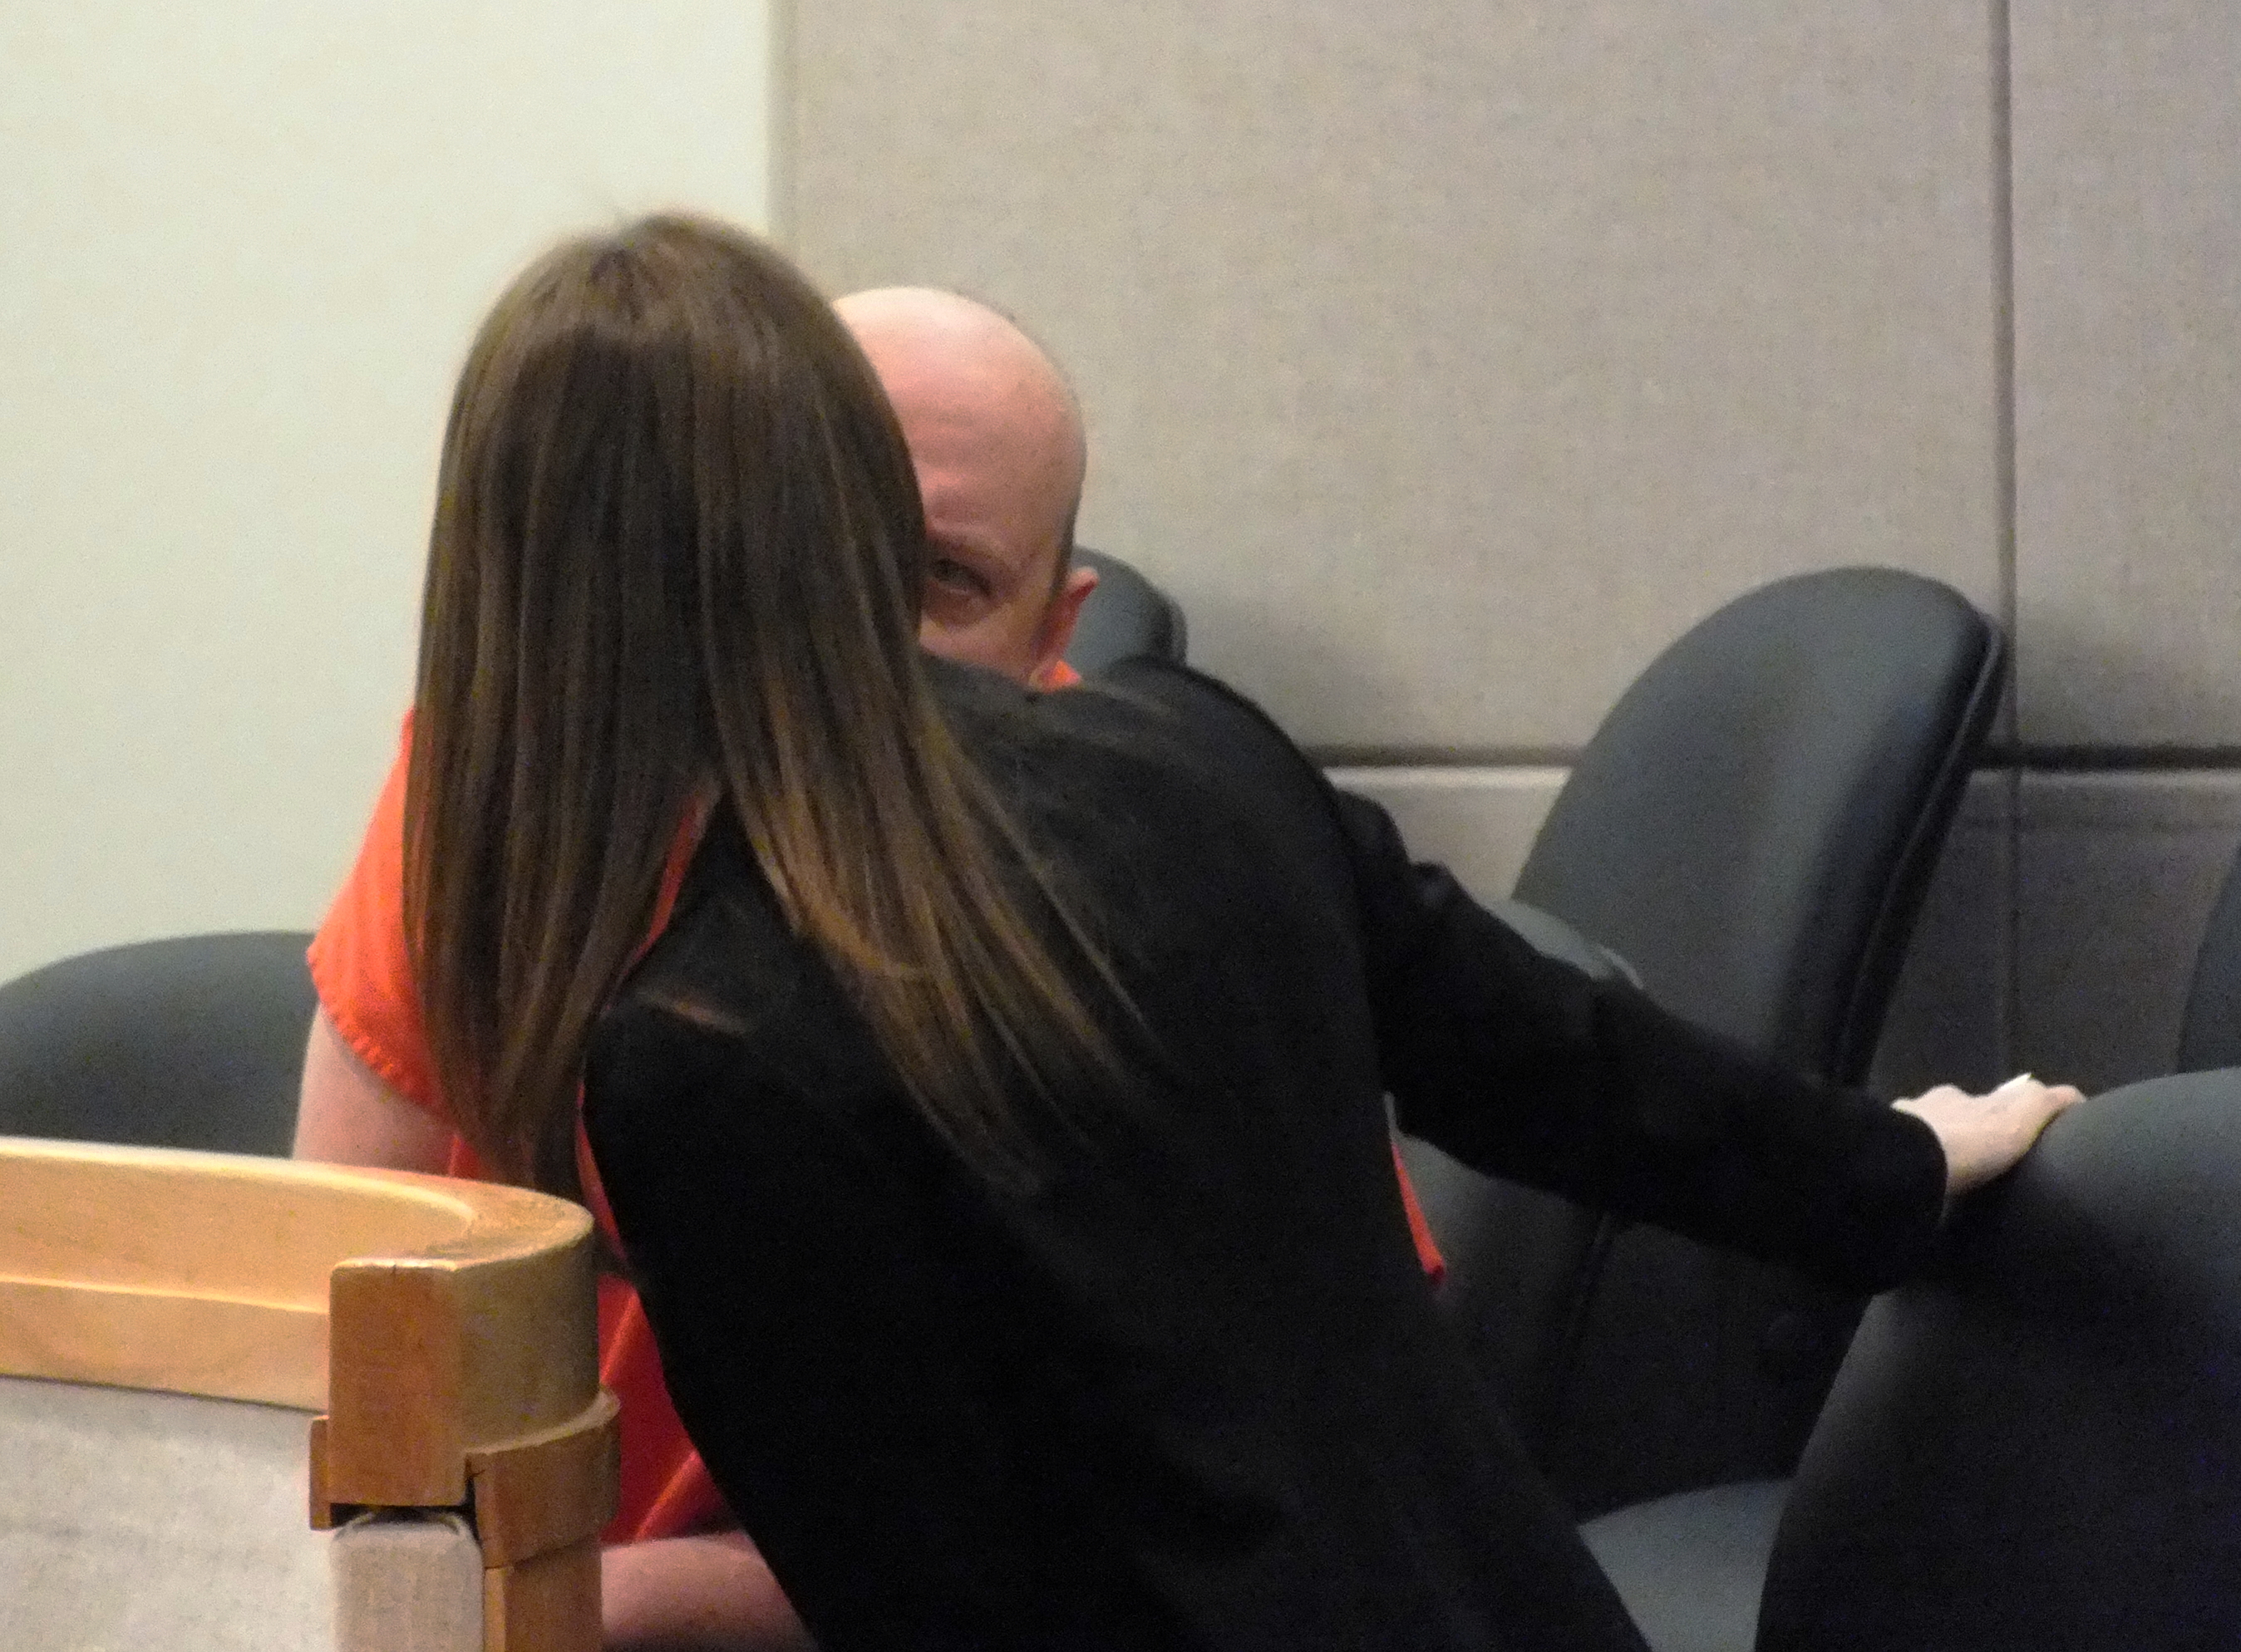 A defendant confers with his court-appointed defense attorney during an arraignment at the Dimond Courthouse in Juneau. (Photo by Matt Miller, KTOO - Juneau)